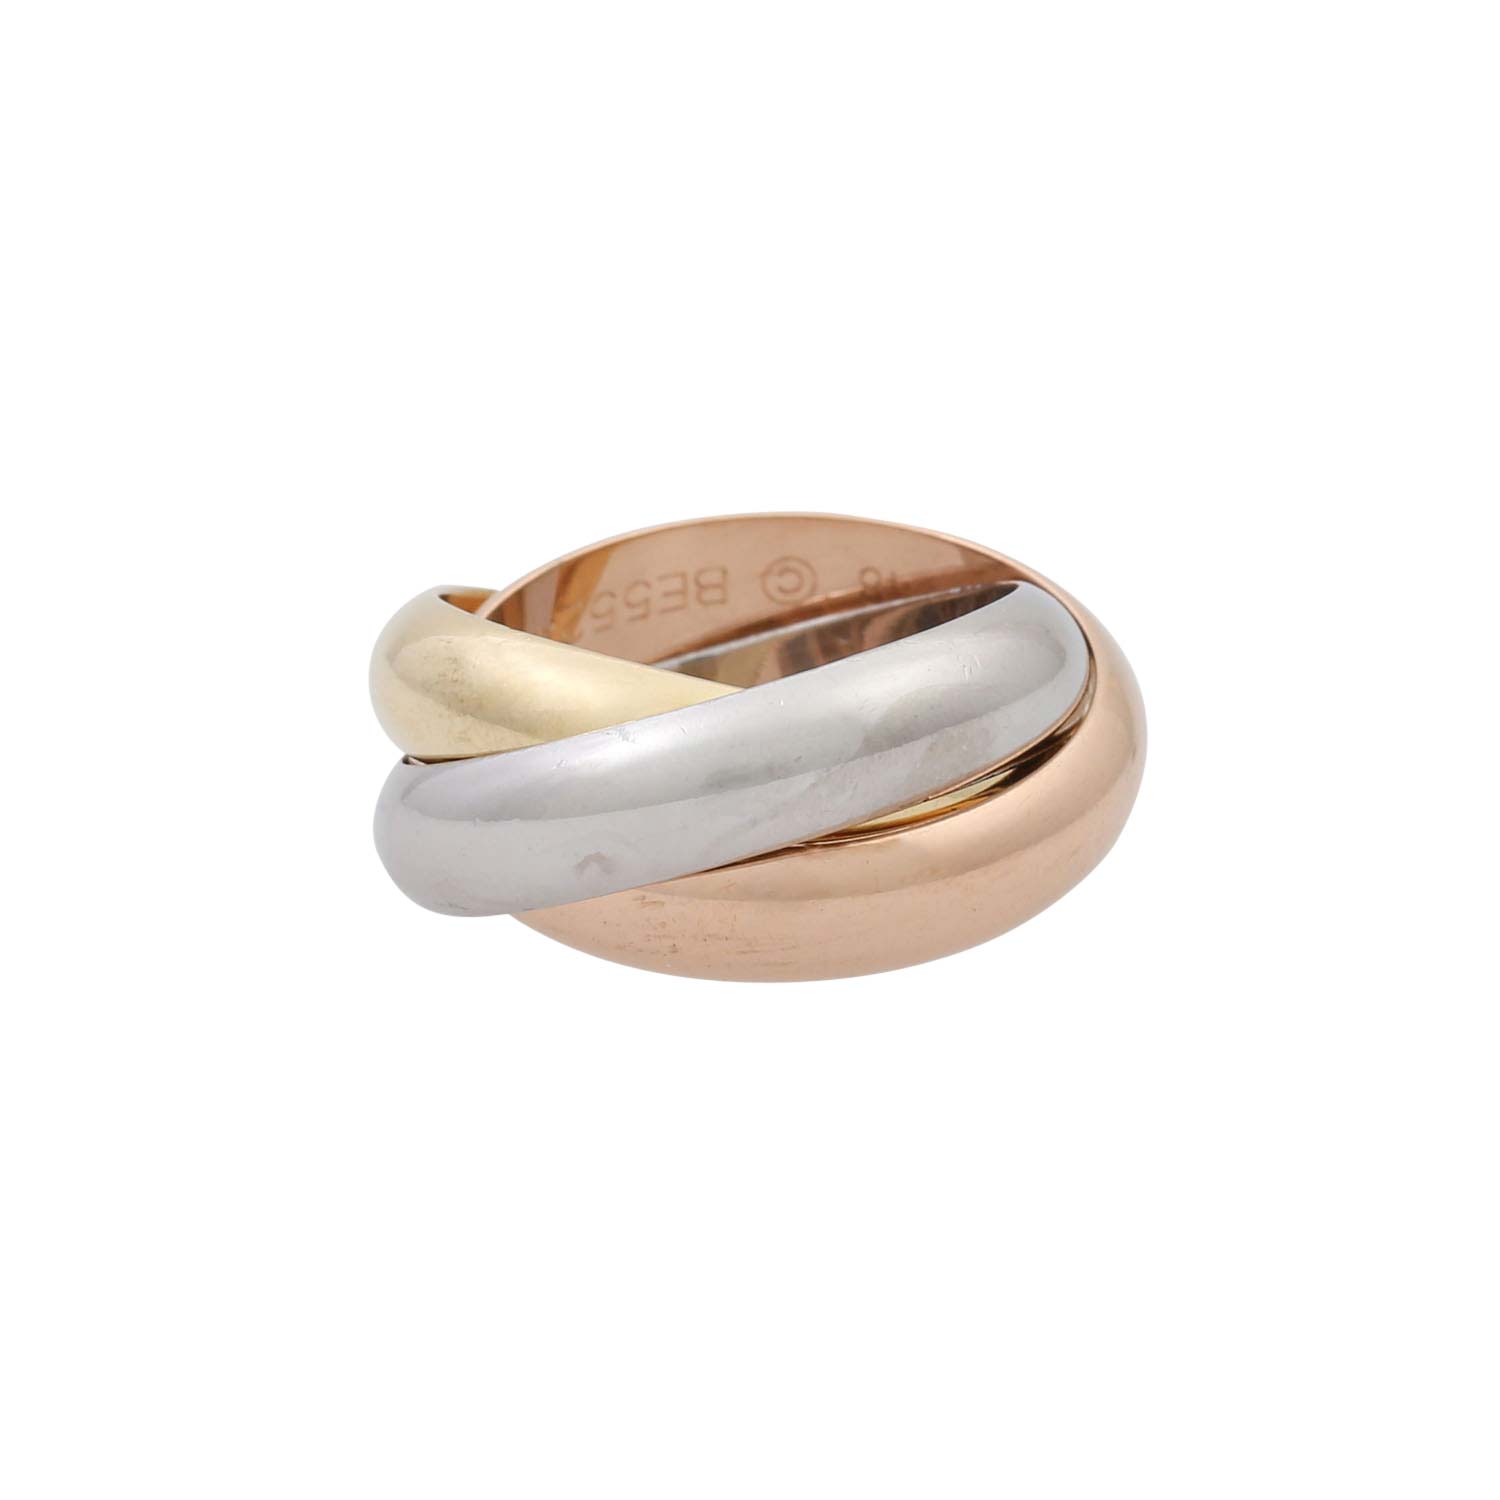 CARTIER Ring "Trinity", - Image 4 of 5